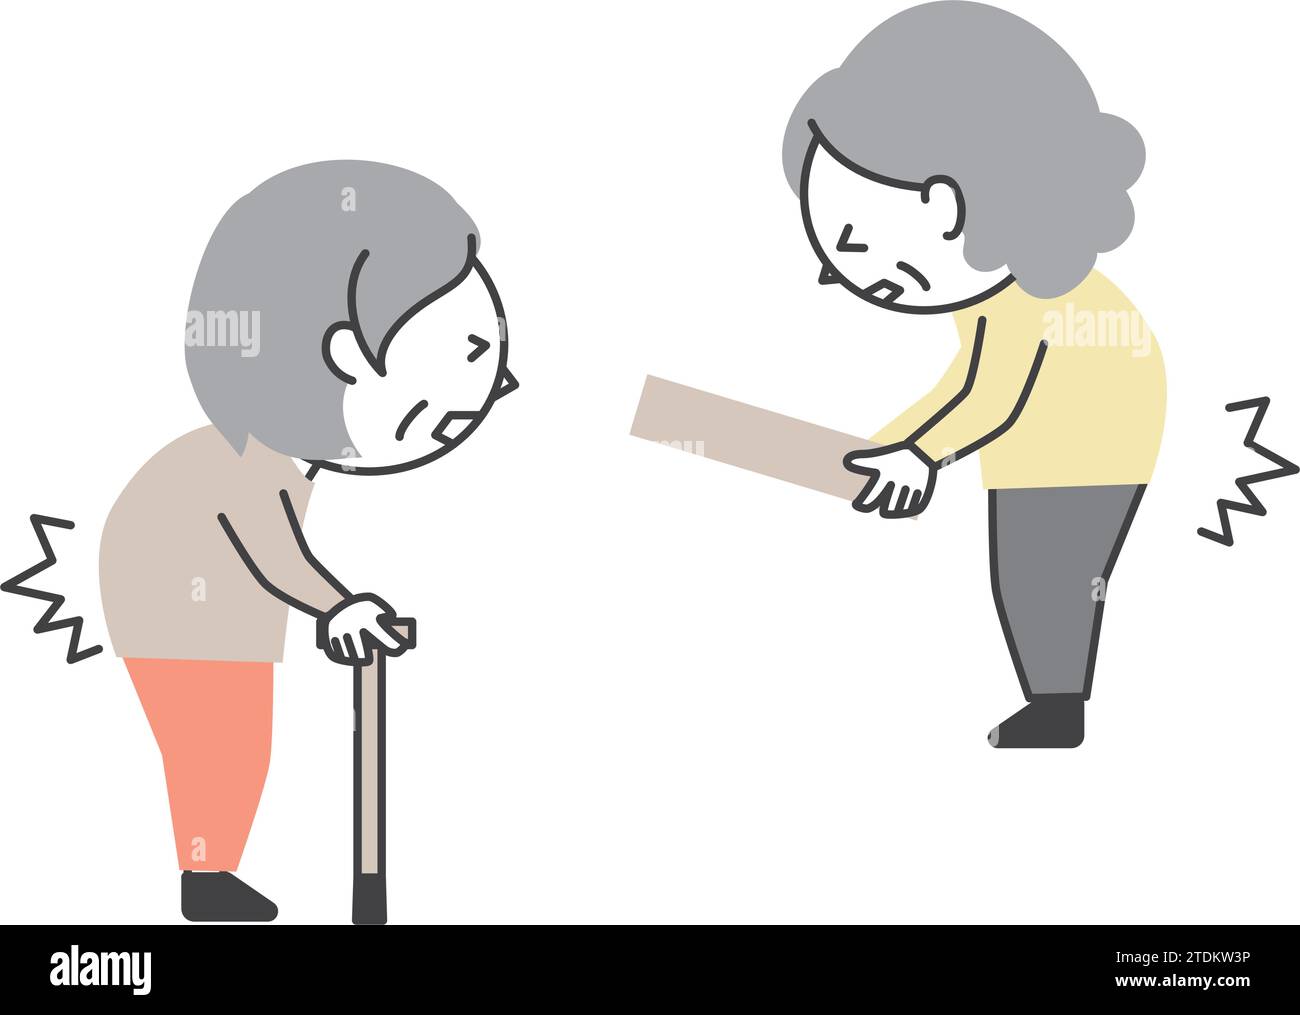 A senior woman with back pain. A woman walking with a cane and a woman lifting luggage. A simple and cute cartoon-style senior illustration. Stock Vector